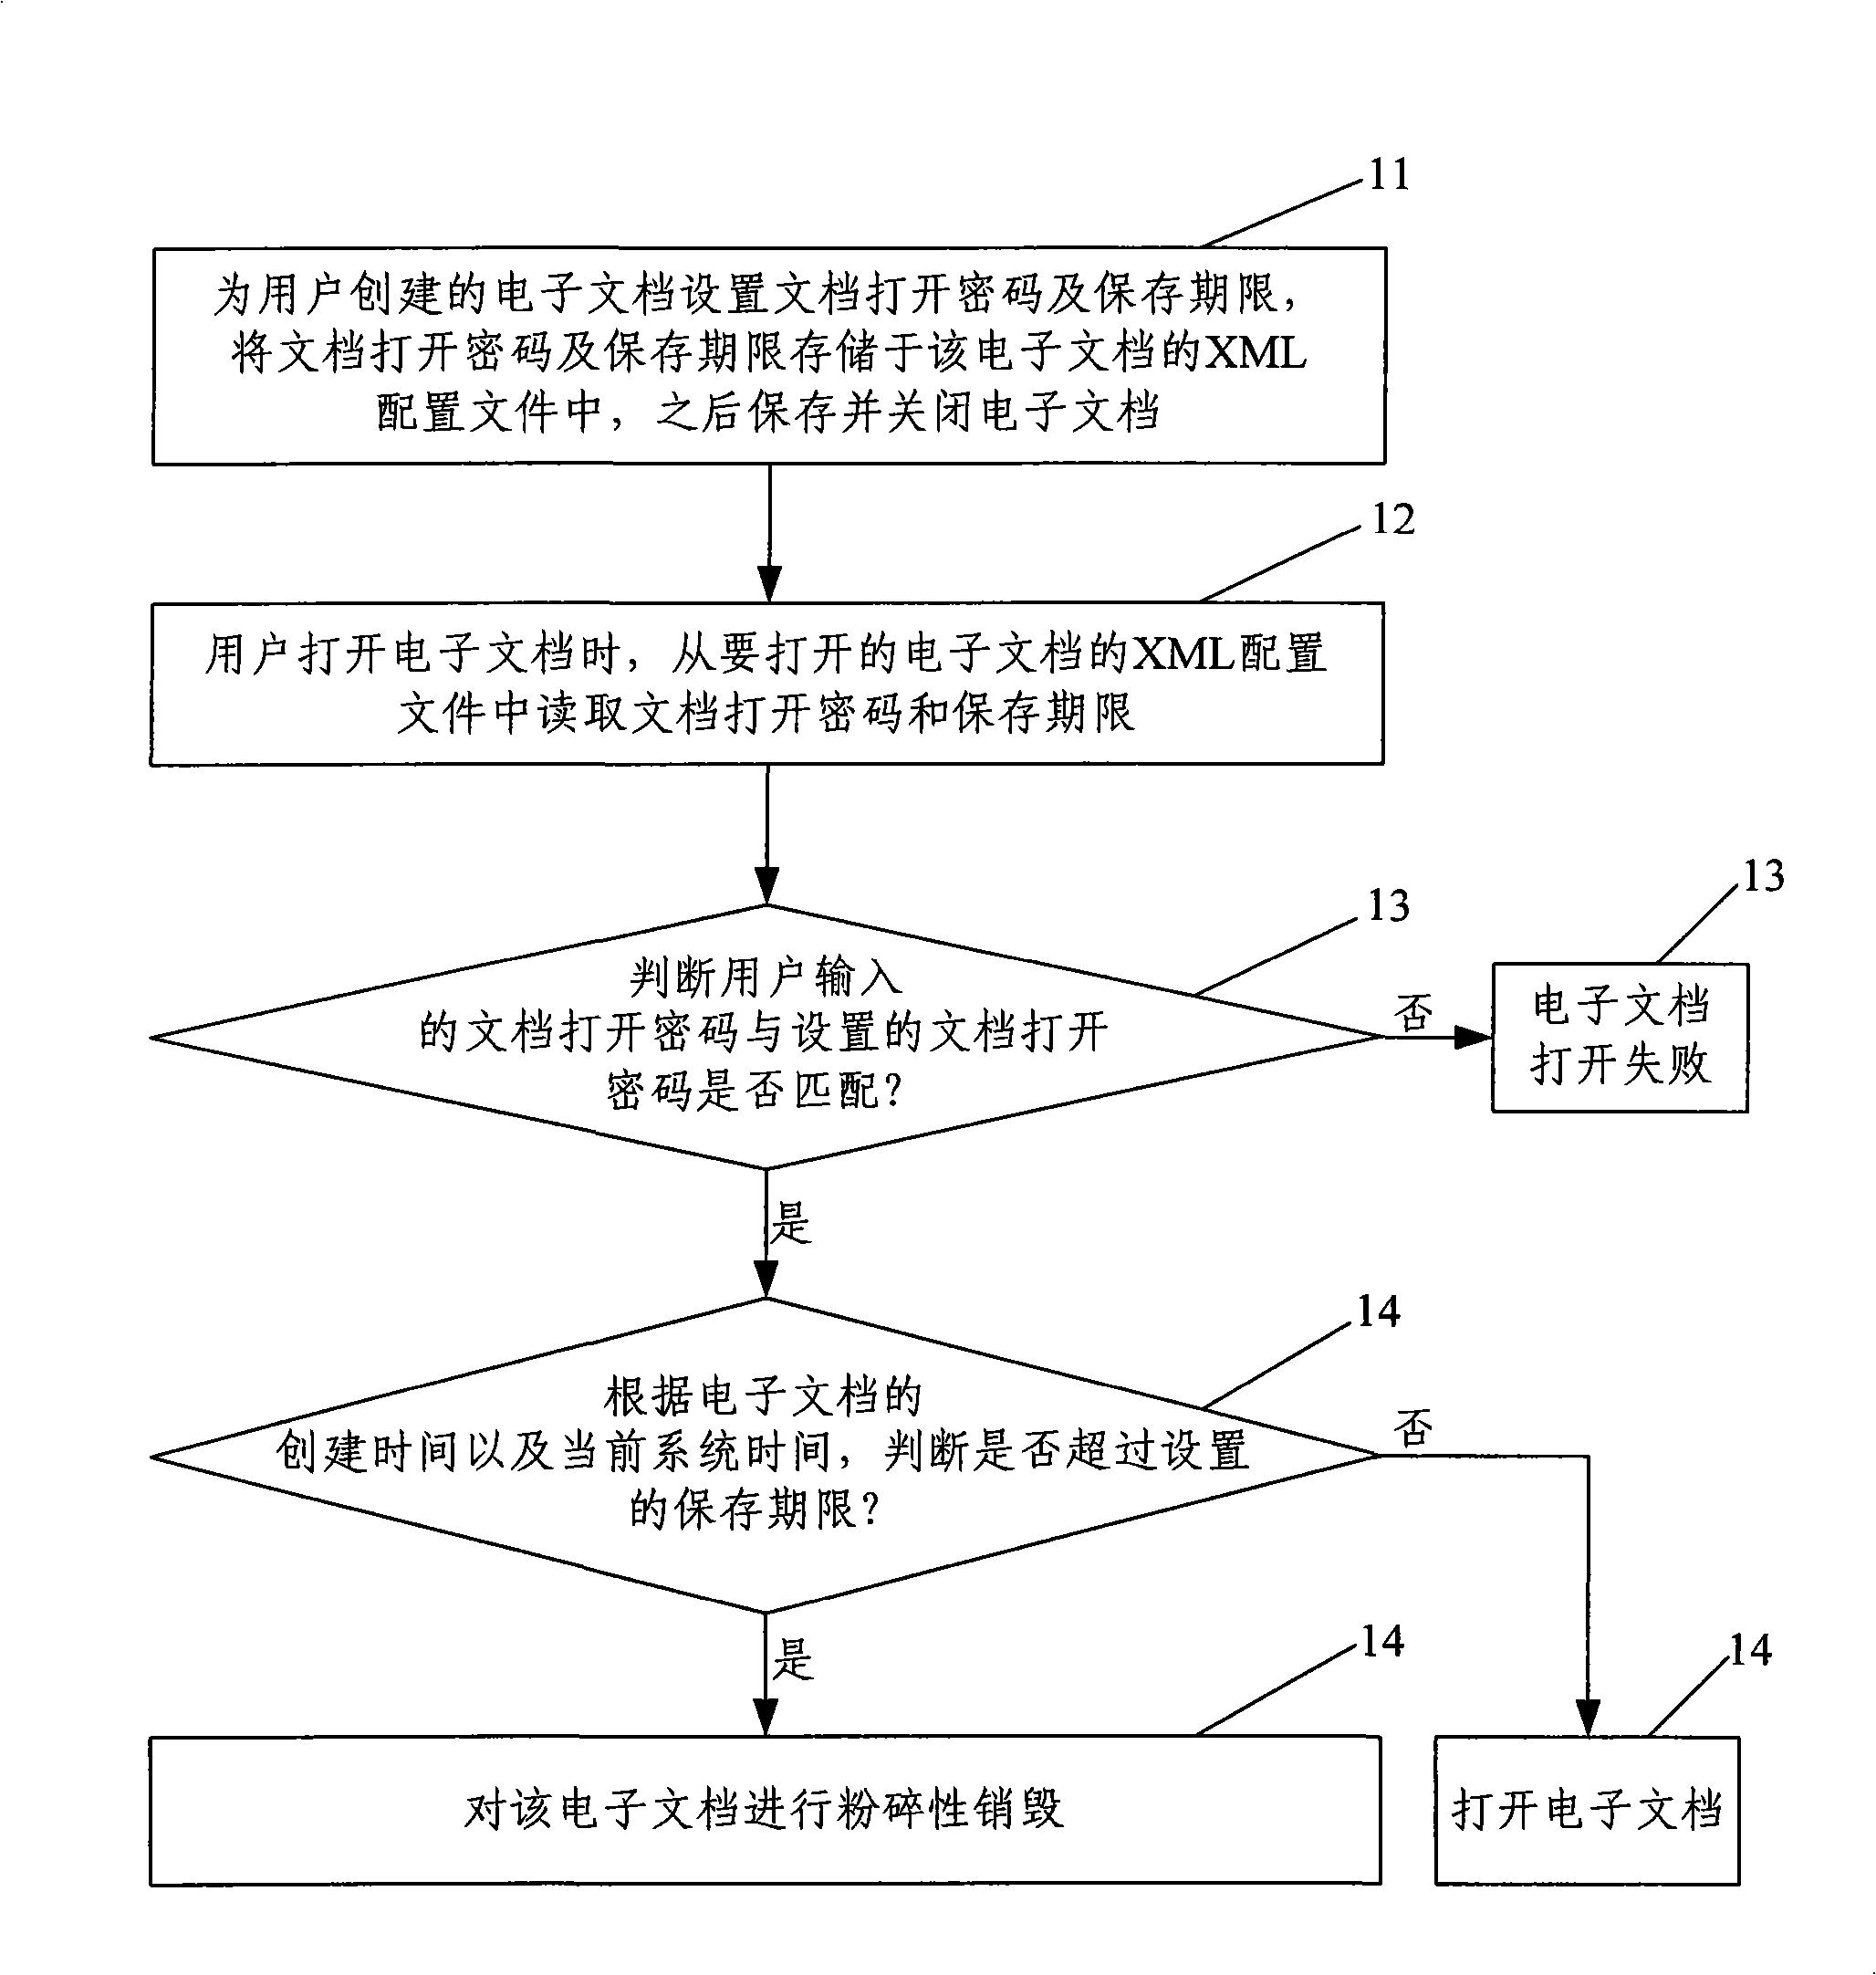 Method for protecting electronic document information and system thereof